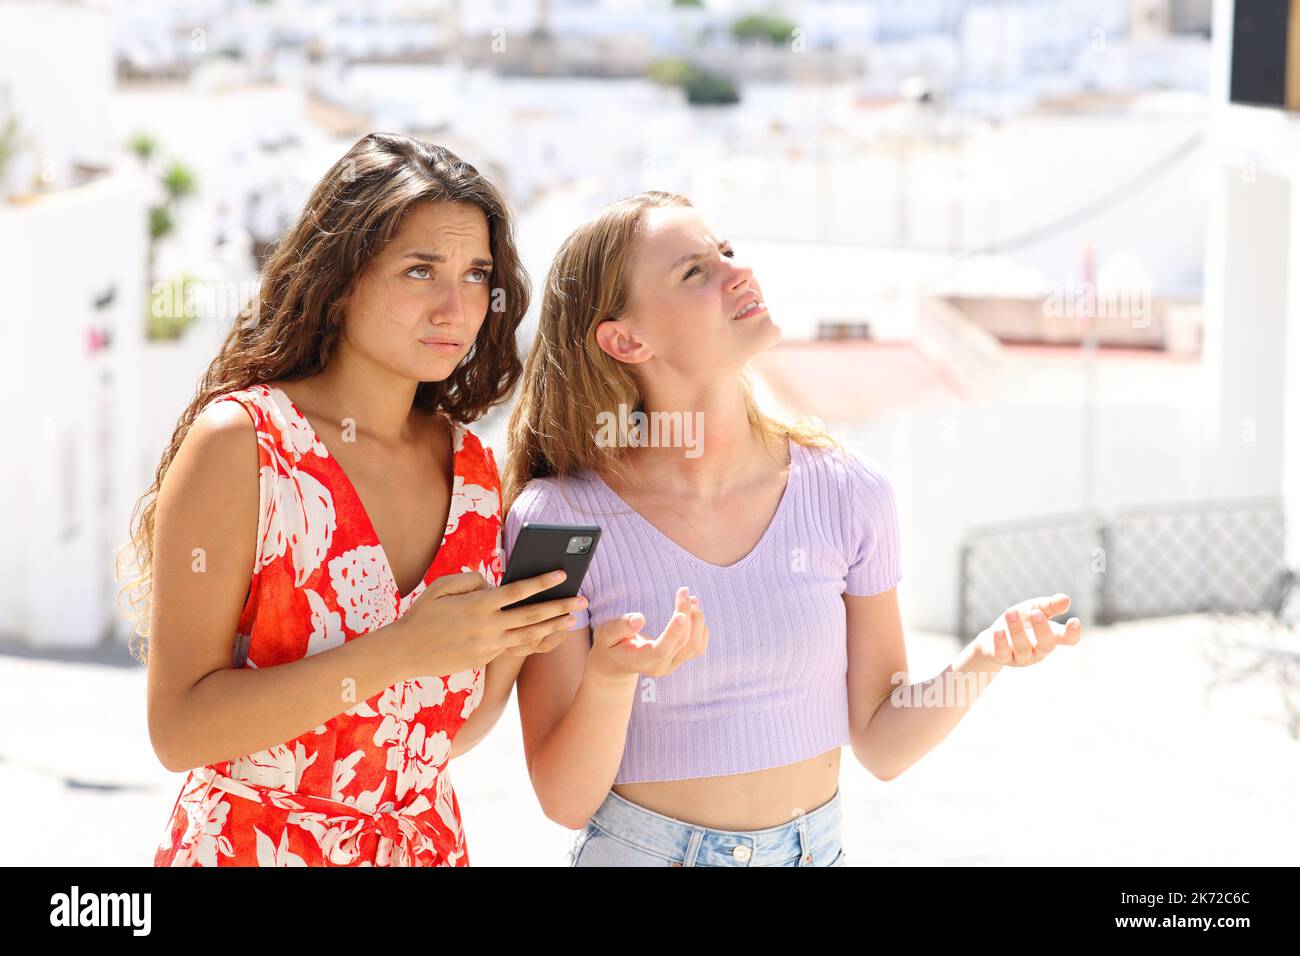 Lost tourists checking location on smart phone in a white town street on summer vacation Stock Photo